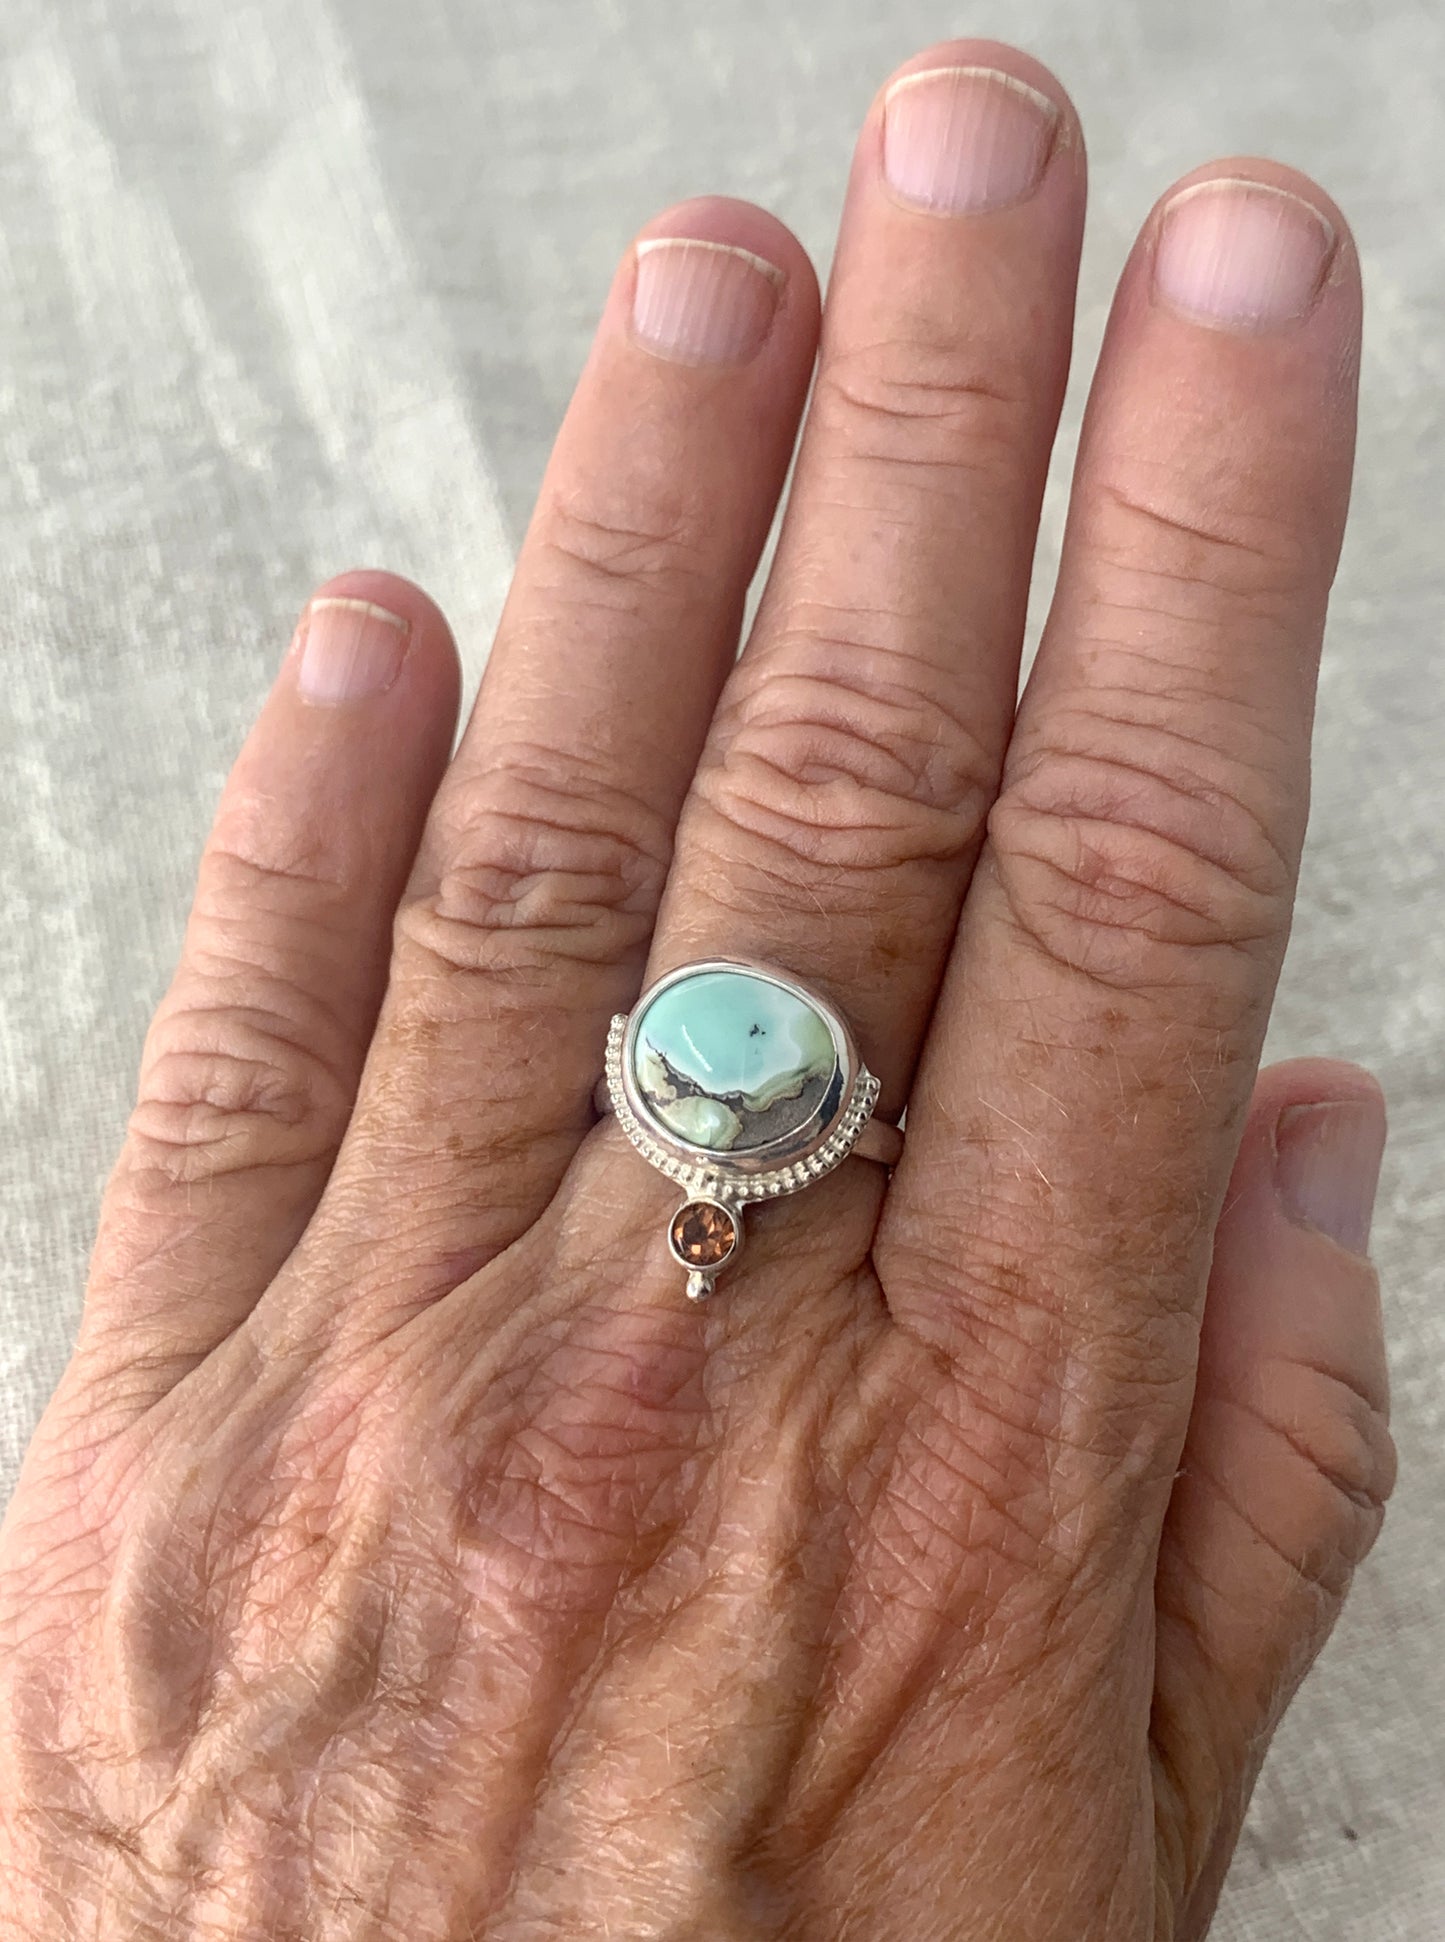 Hand fabricated, two stone, moderate statement ring featuring a stunning Poseidon Variscite cabochon paired with a bright, faceted pink/peach Tourmaline and silver raindrop and beaded wire details.